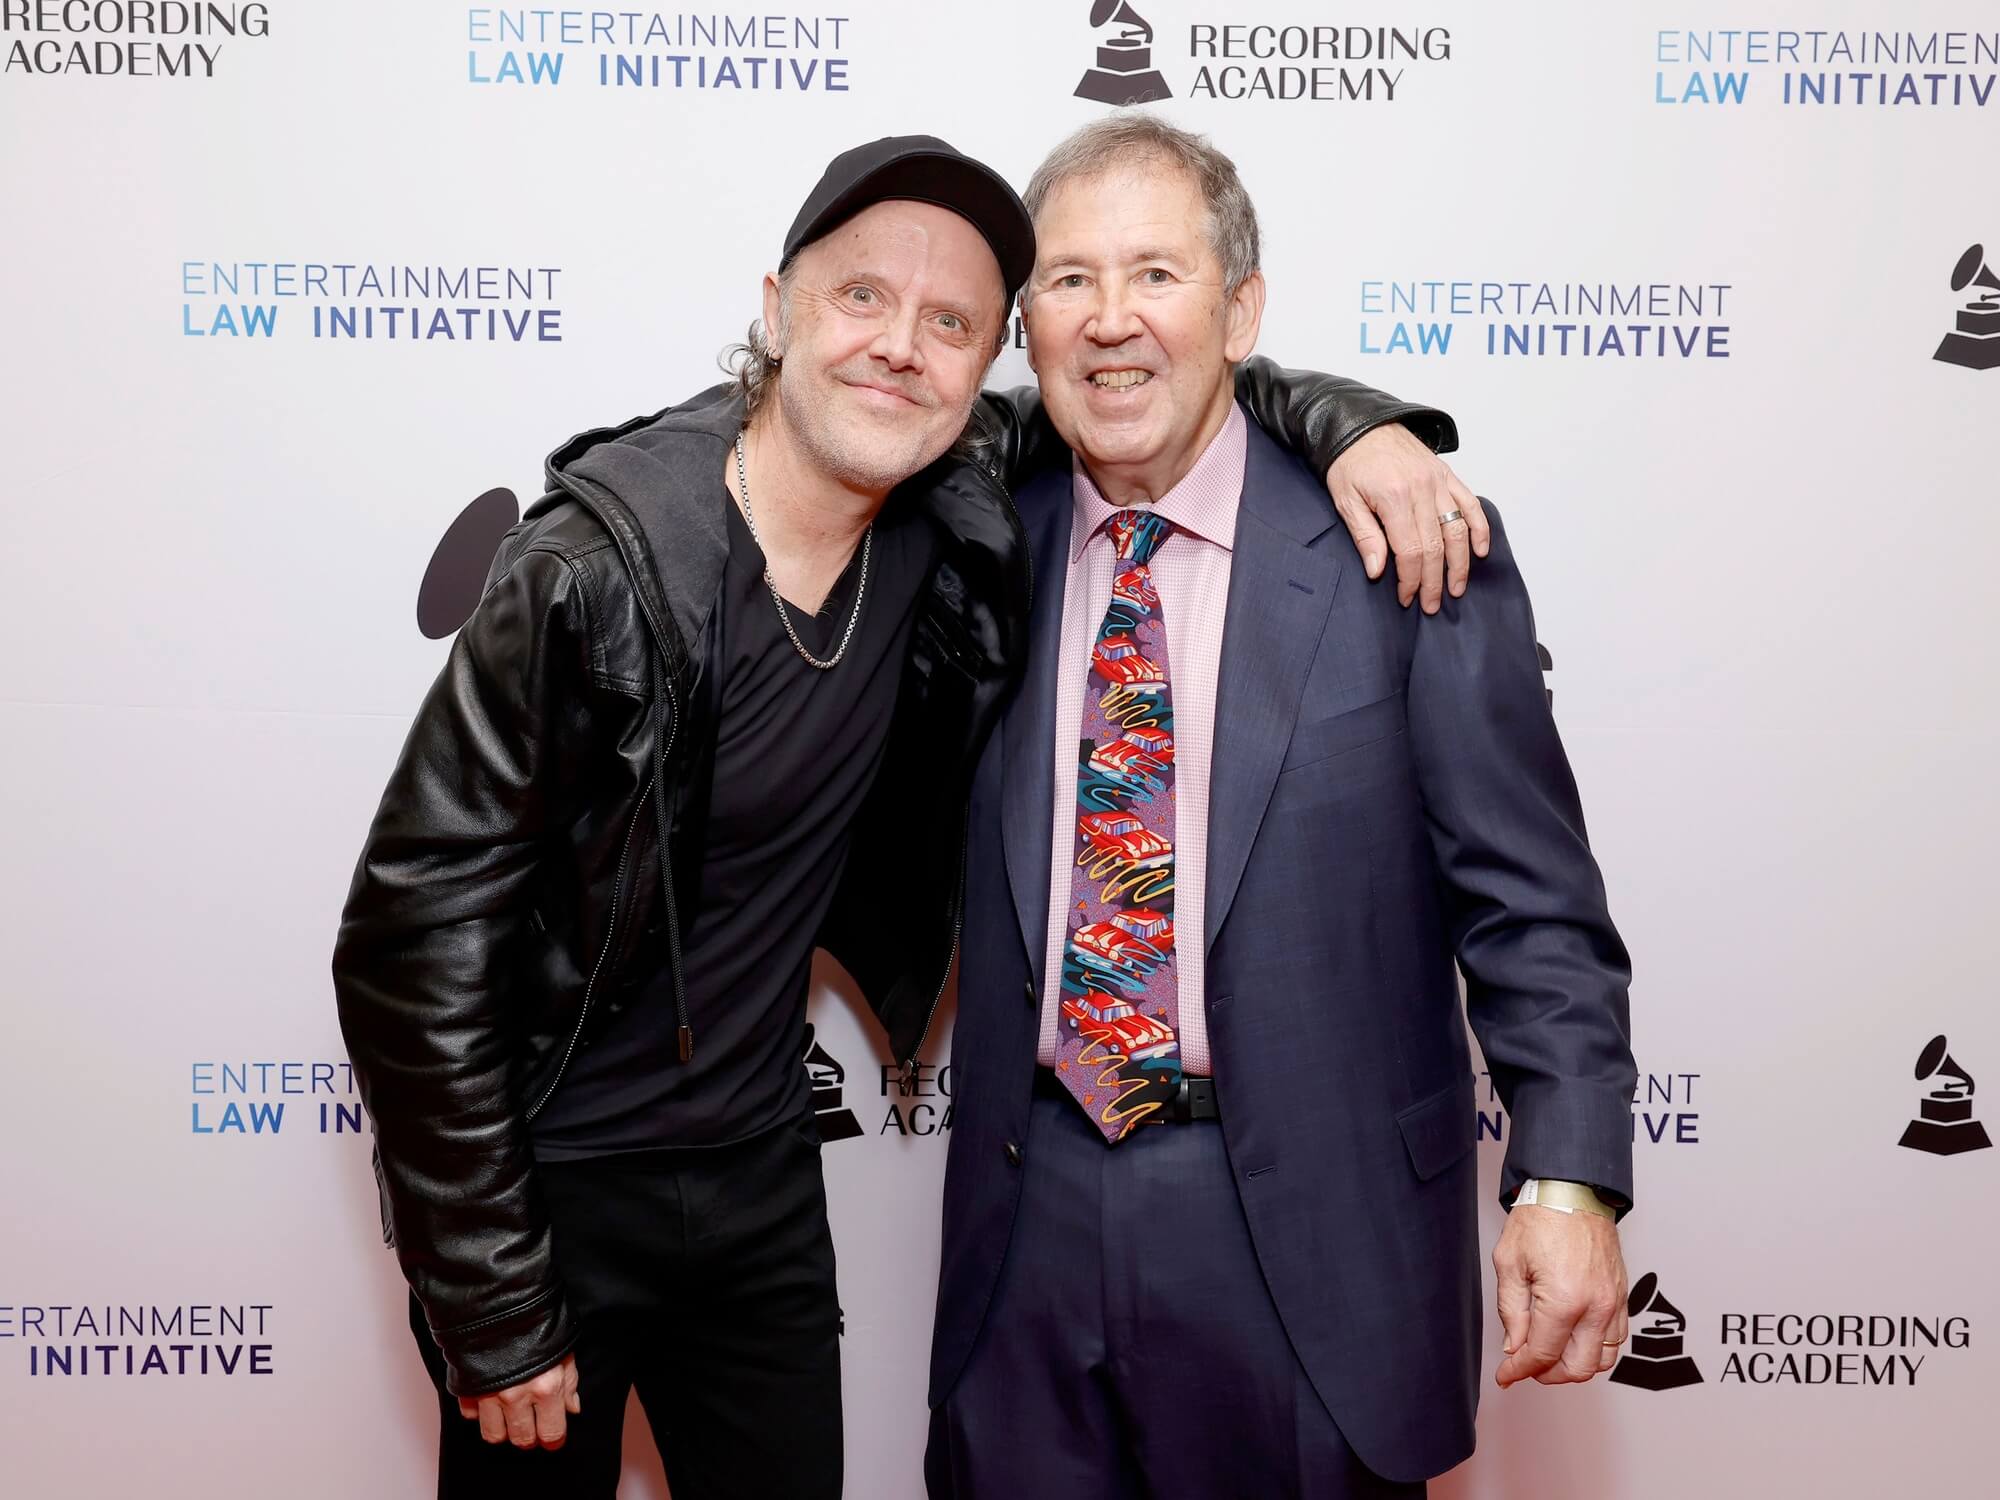 Metallica's Lars Ulrich and lawyer Peter Paterno,